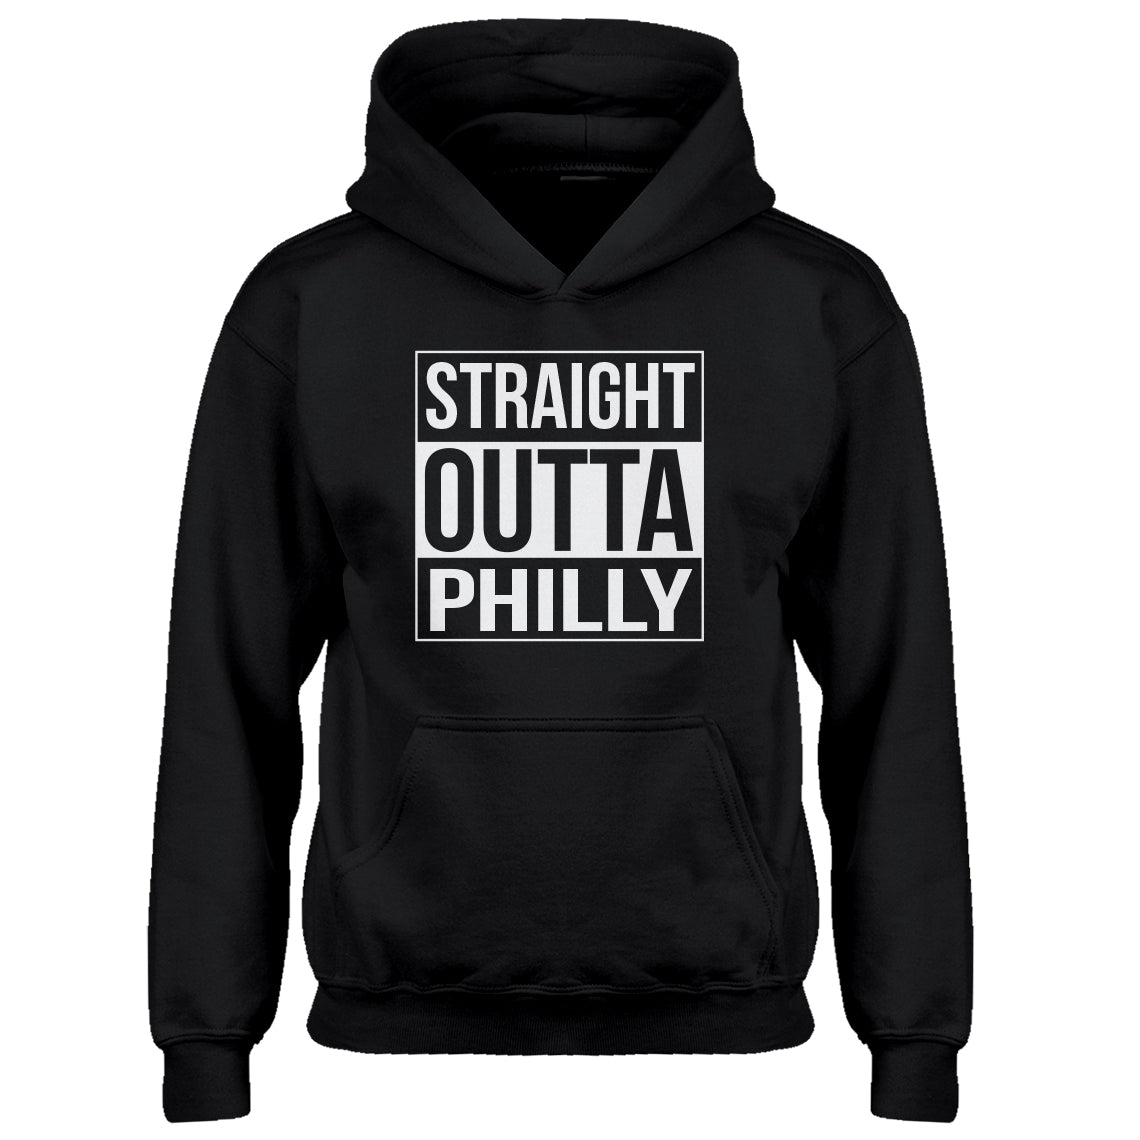 Youth Straight Outta Philly Kids Hoodie